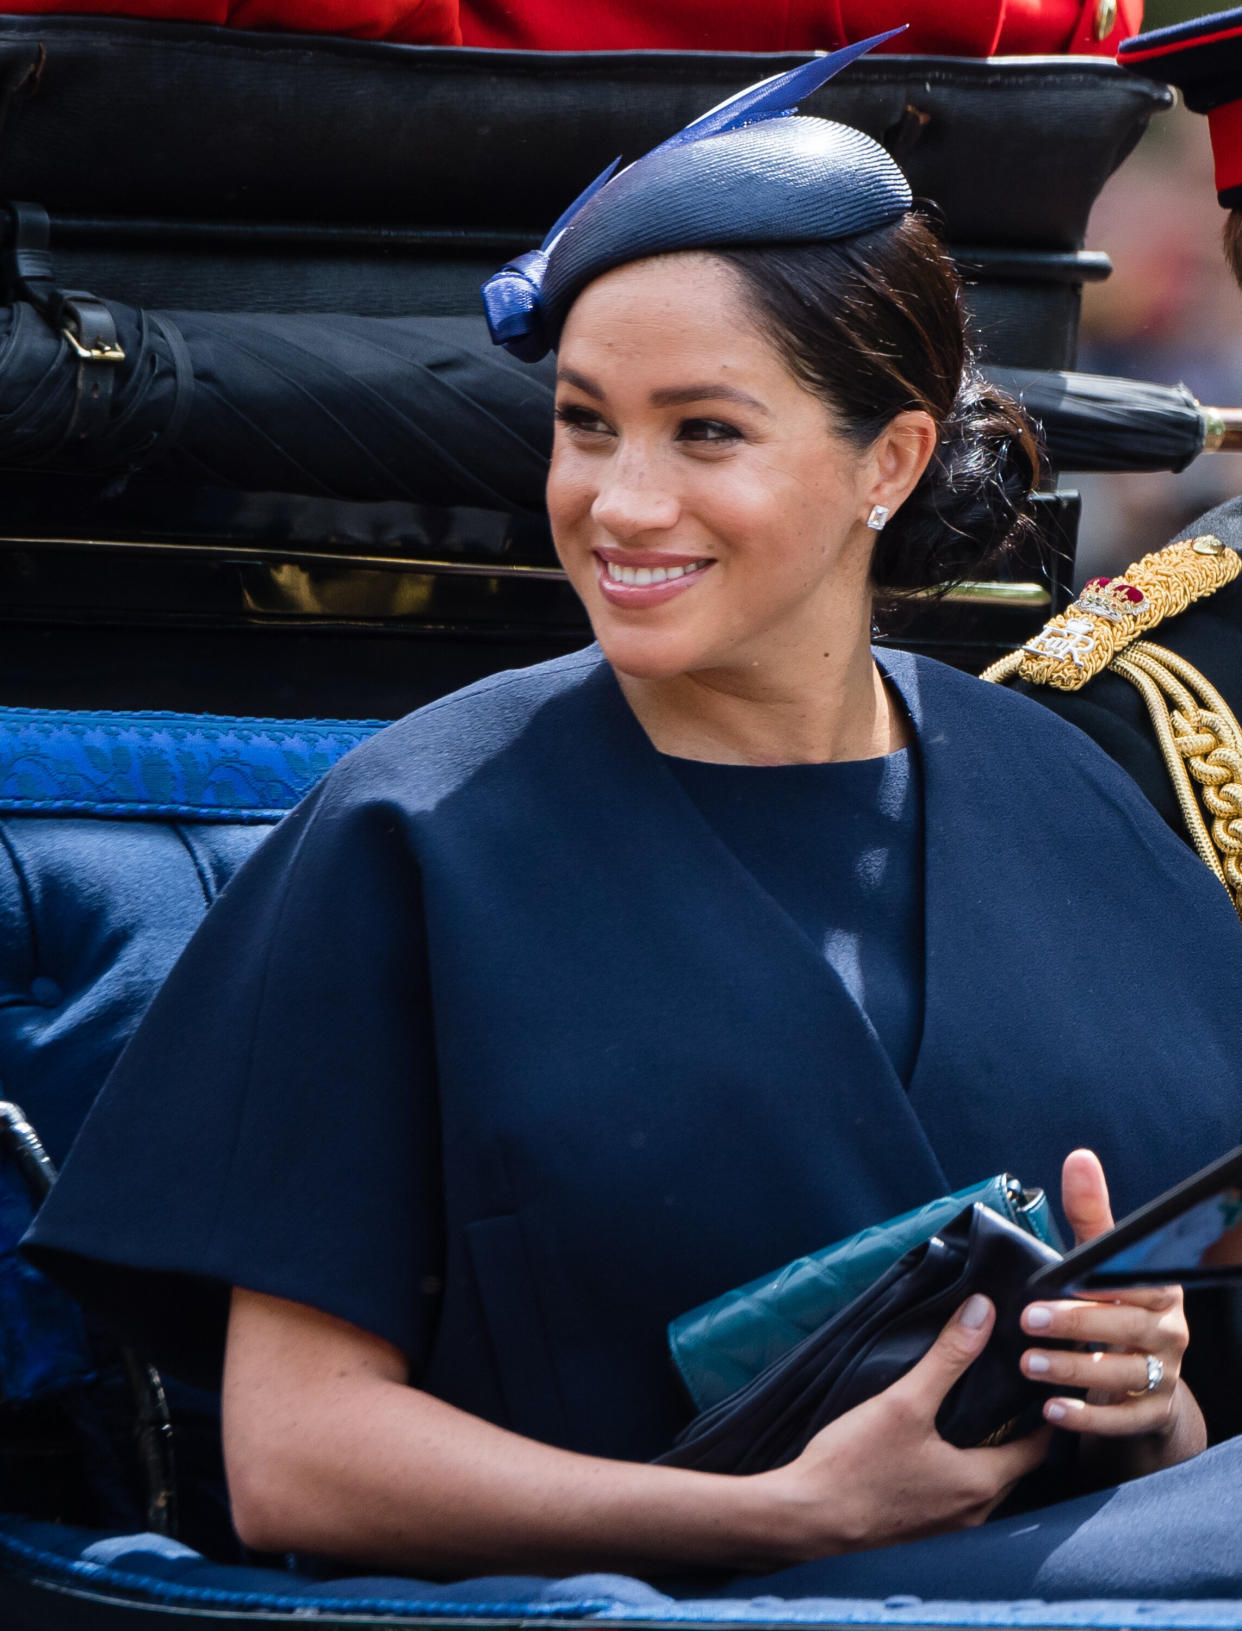 The Duchess of Sussex looked stylish in Givenchy for the carriage ride back to Buckingham Palace [Image: Getty]